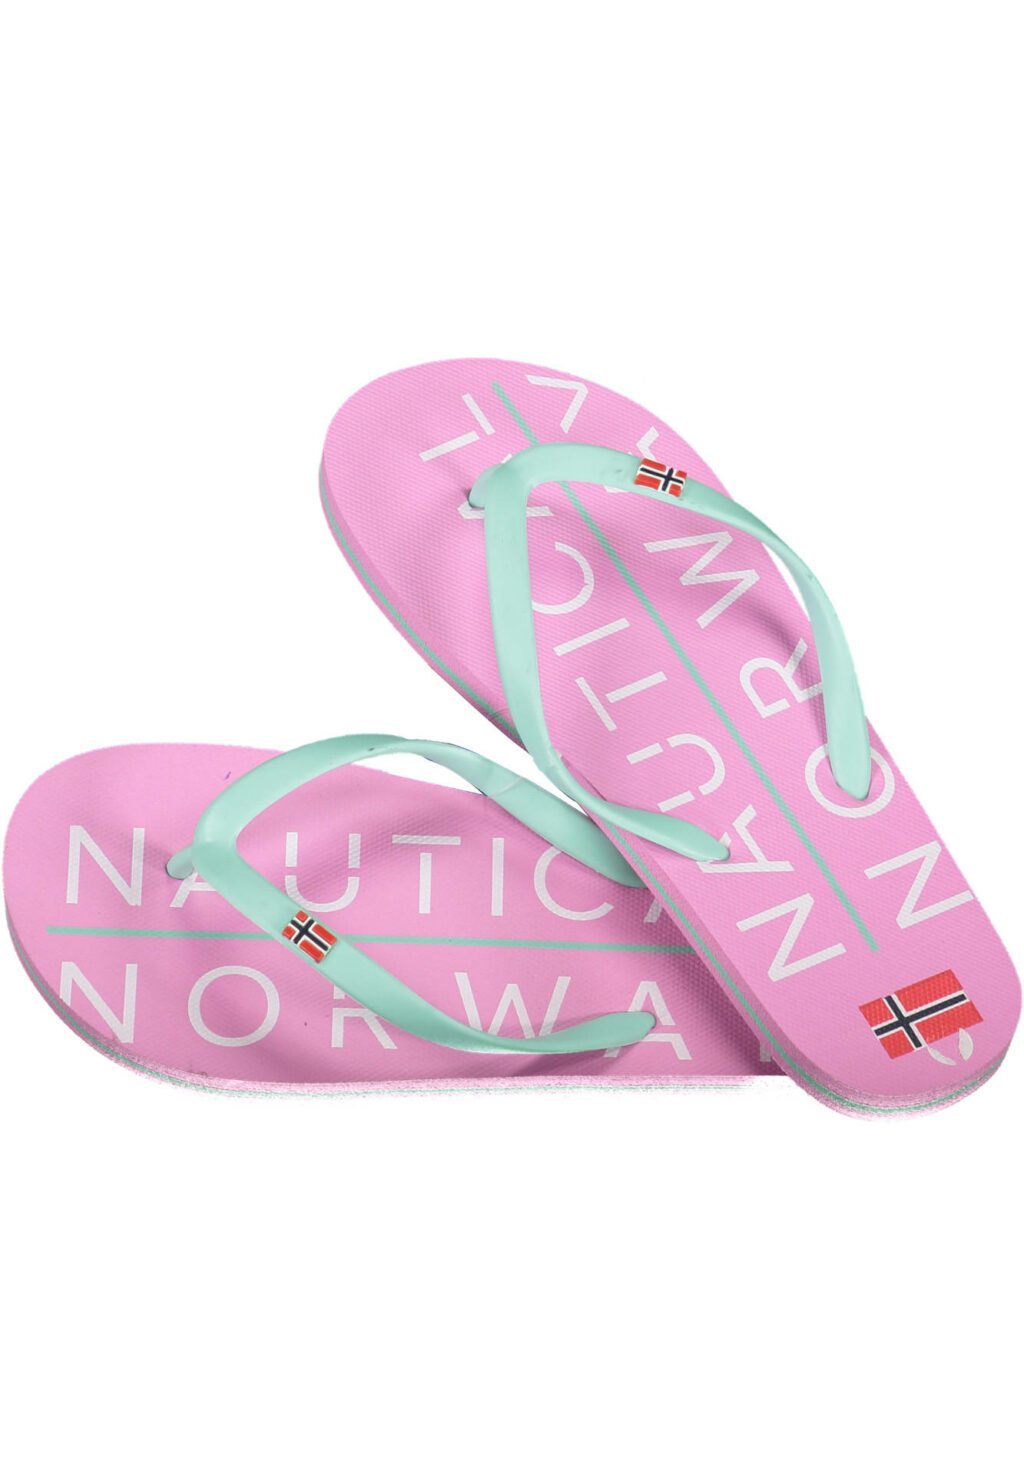 NORWAY 1963 PINK WOMEN'S SLIPPER SHOES 831015_ROSA_PINK